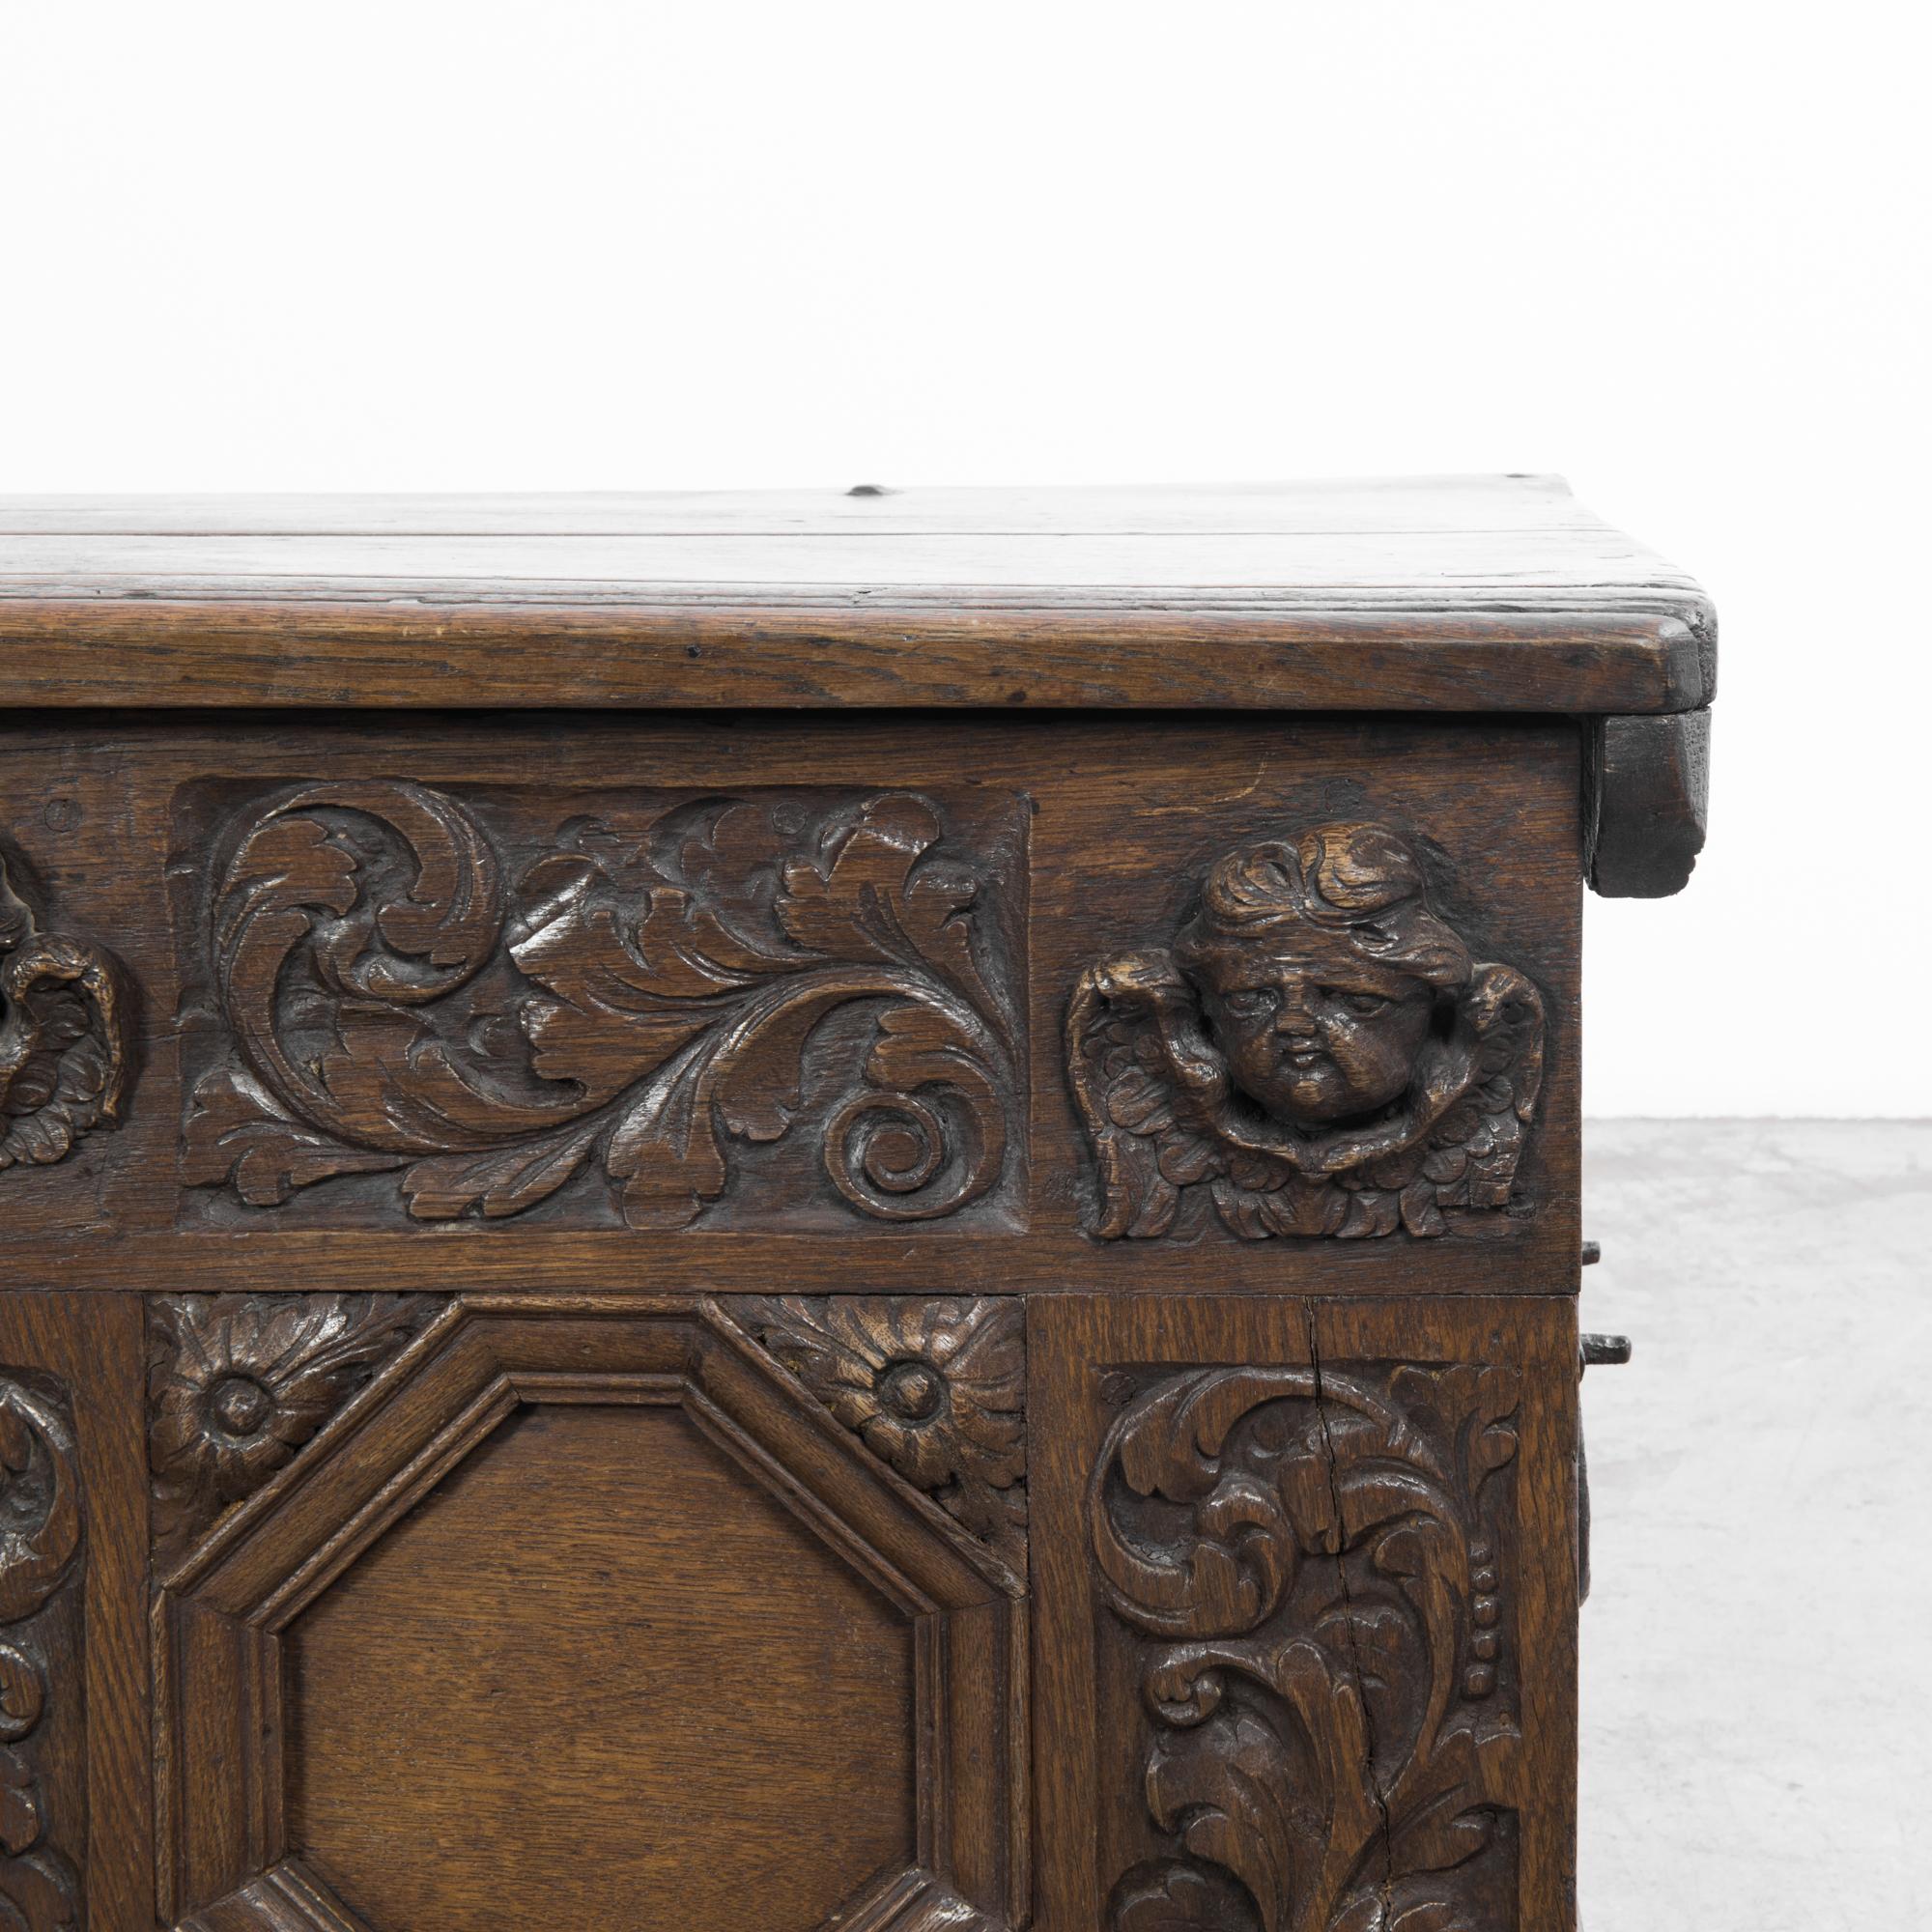 Hand-Carved 1720s German Wooden Trunk with Original Patina